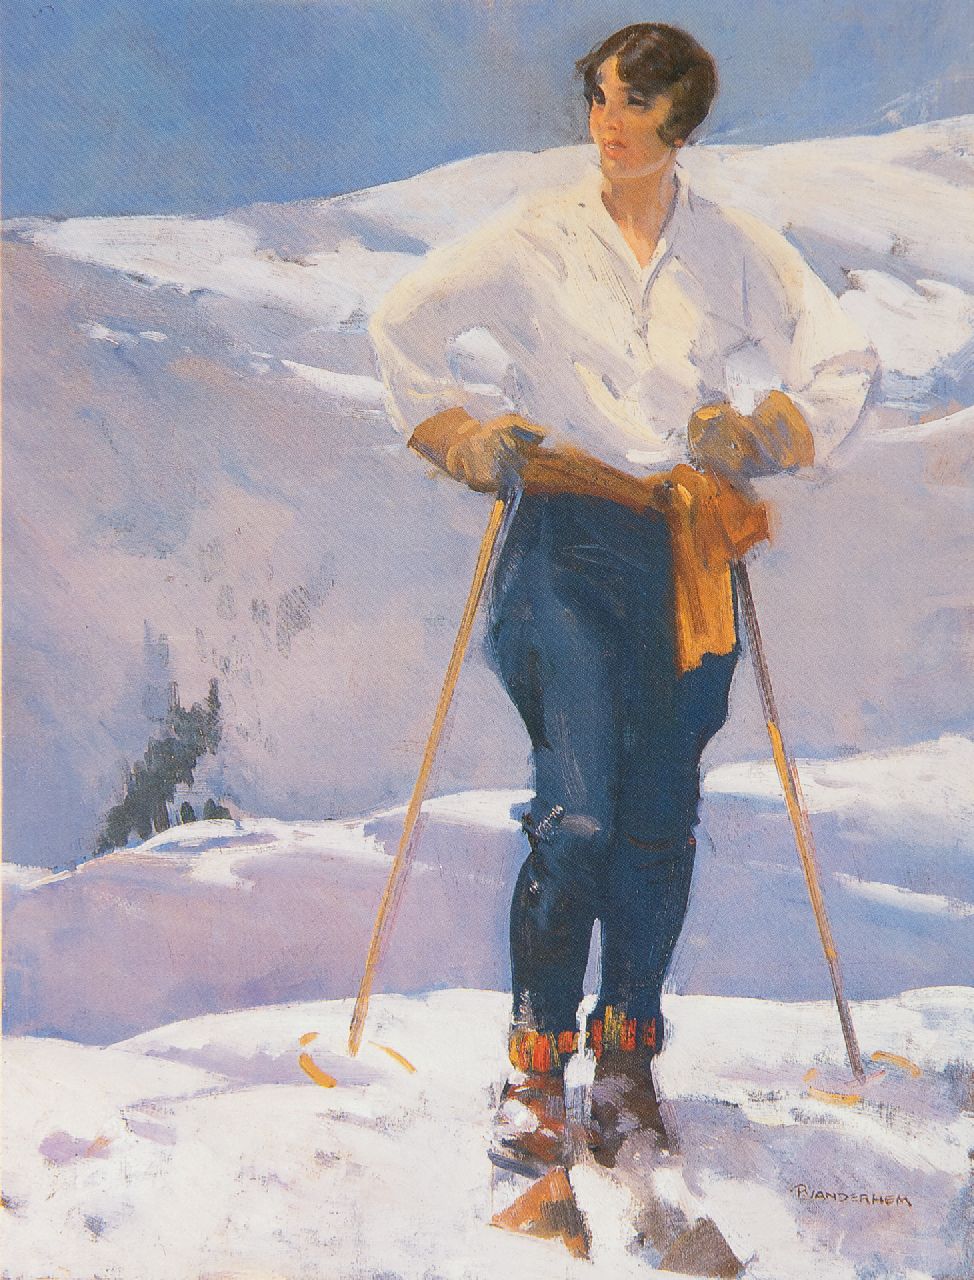 Hem P. van der | Pieter 'Piet' van der Hem, Young woman on skis, oil on canvas 64.5 x 50.0 cm, signed l.r. and to be dated 1920s